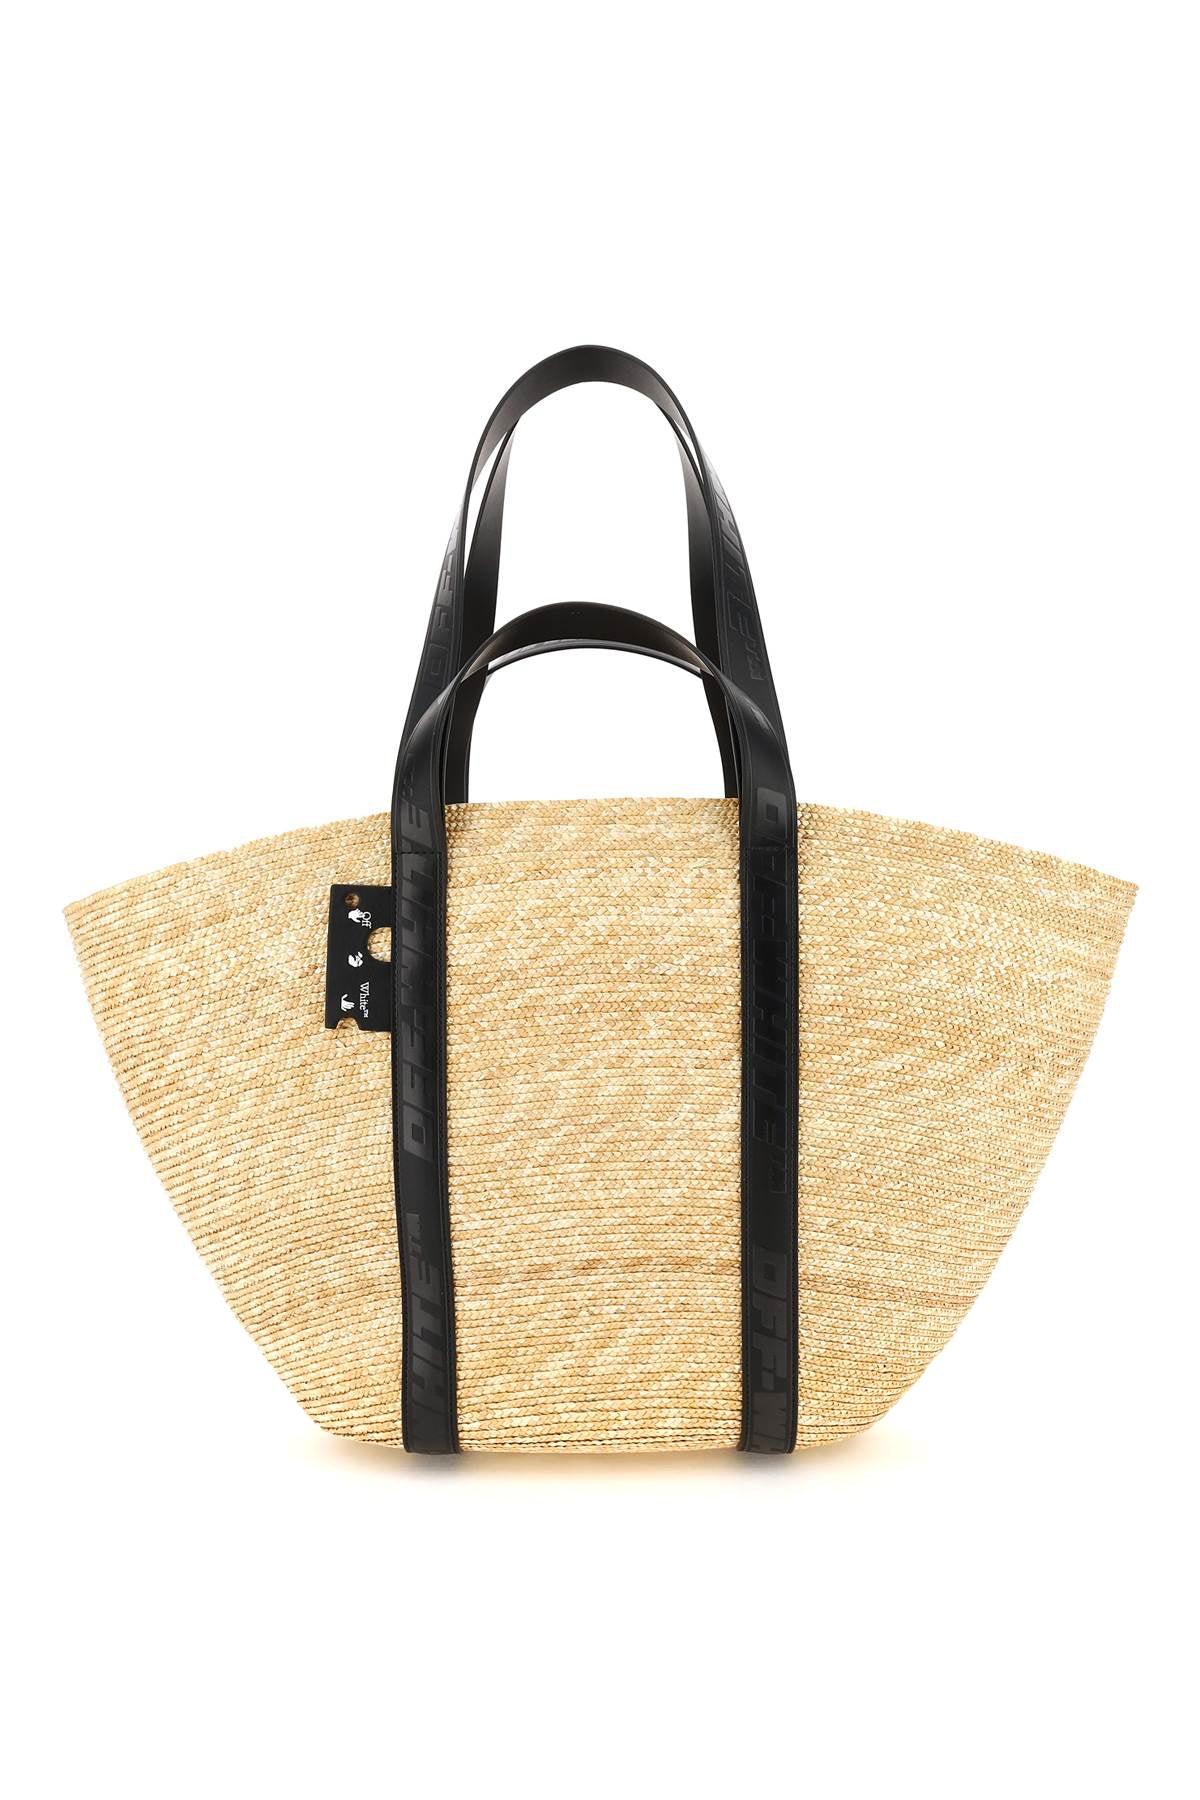 Off-White c/o Virgil Abloh Commercial Tote 45 Straw Bag in Metallic | Lyst